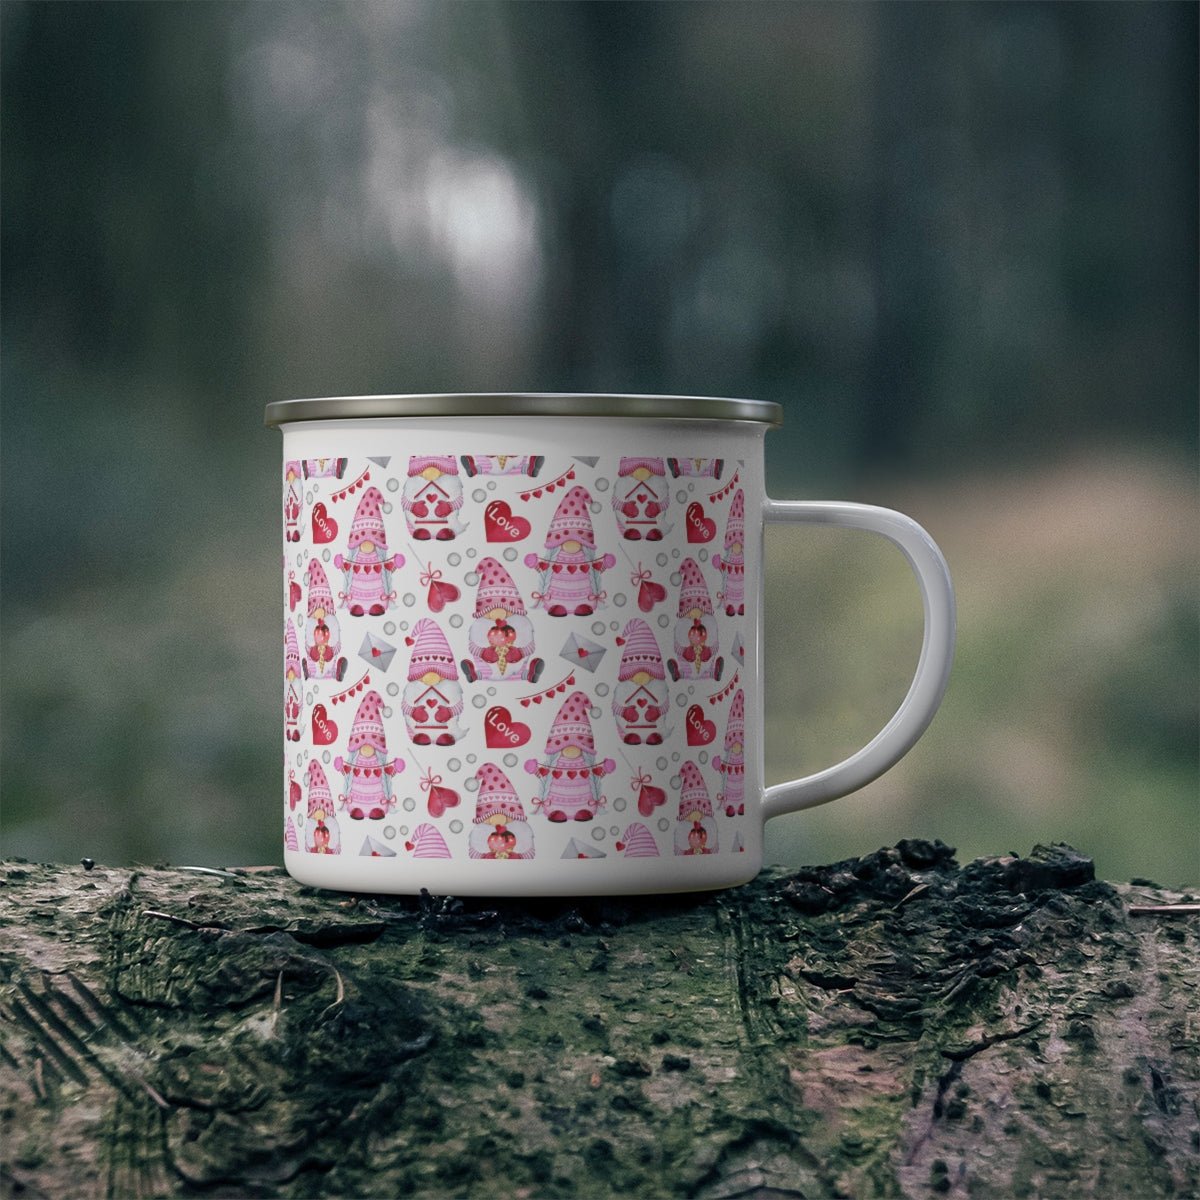 Gnomes and Hearts Stainless Steel Camping Mug - Puffin Lime